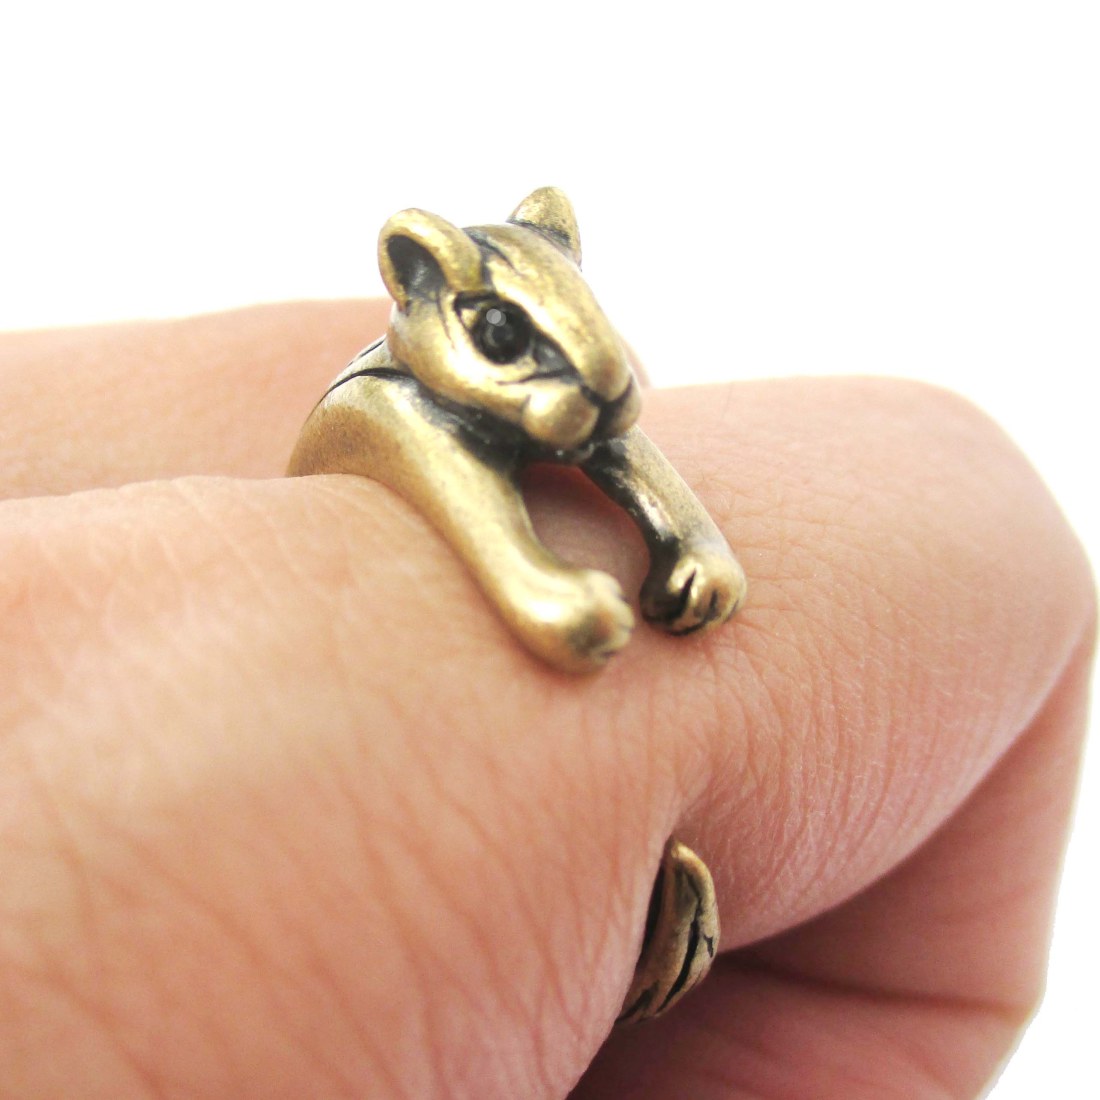 Adorable Squirrel Animal Wrap Around Ring In Brass - Size 3 To 8.5